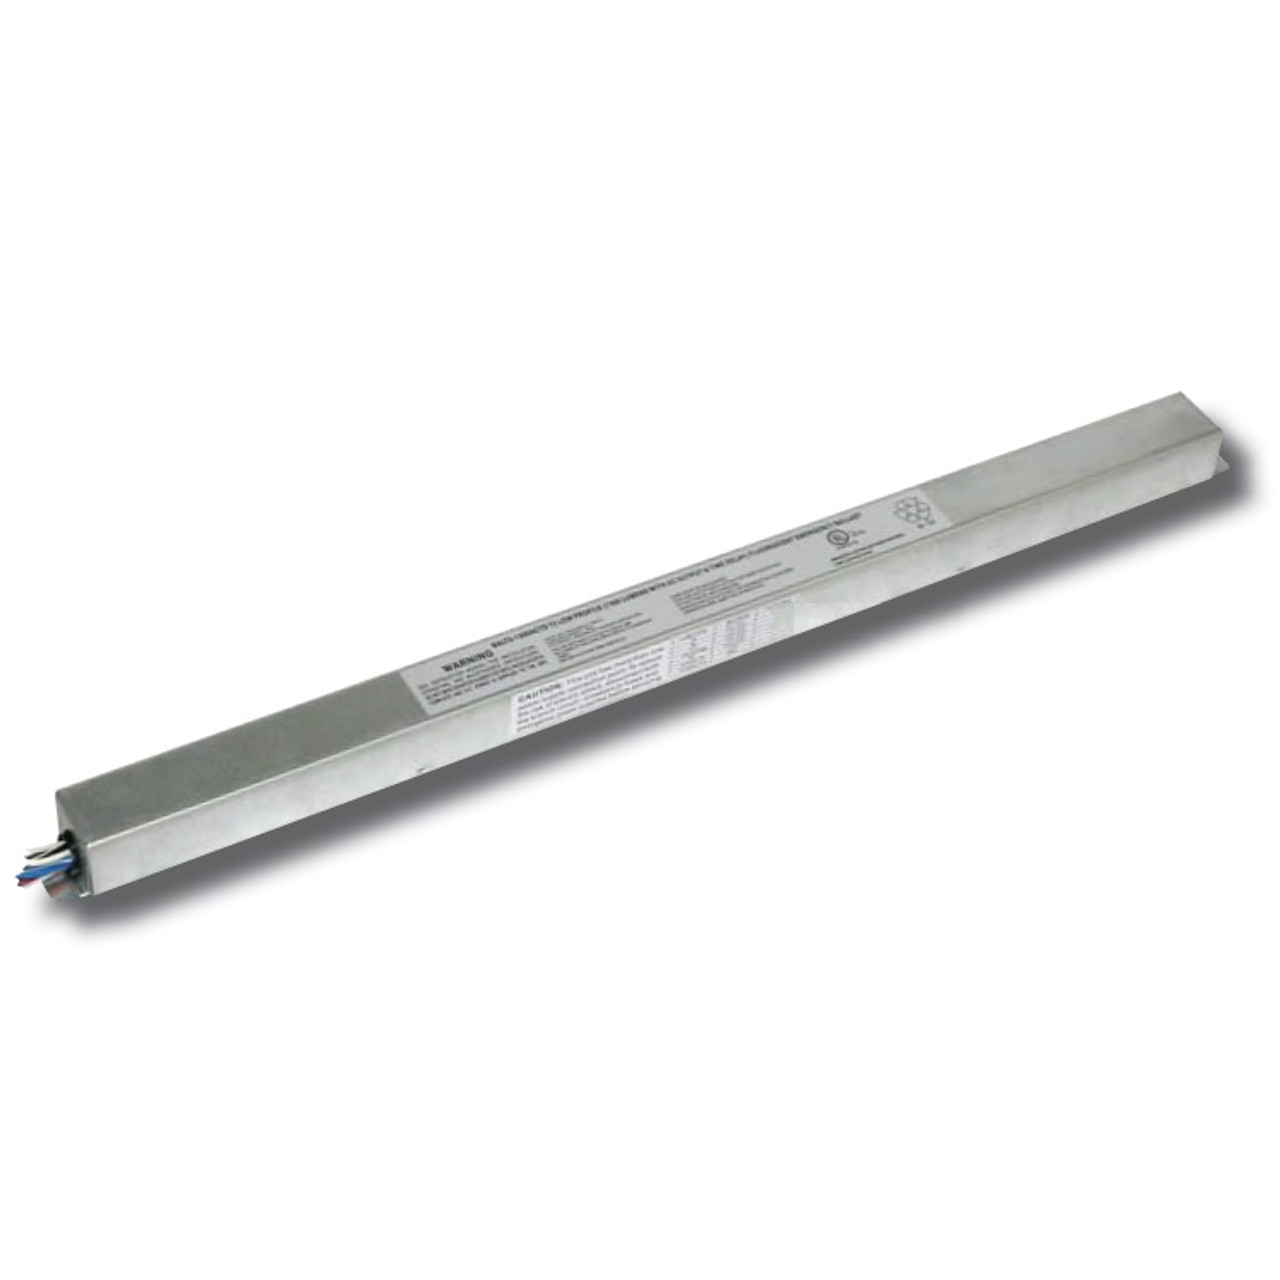 Works with or without an AC ballast to convert new or existing fluorescent fixtures in to unobtrusive emergency lighting.
Operates one lamp in the emergency mode for a minimum of 90-minutes.
Provides a maximum initial lumen output of 1300 lumens.
Dual 120/277 voltage.
Charge rate/power “ON” LED indicator light and push-to-test switch for mandated code compliance testing.
8.4V long life, maintenance-free, rechargeable sealed NiCd battery.
Internal solid-state transfer switch automatically connects the internal battery to fluorescent lamp for minimum
90-minute emergency illumination.
Fully automatic solid-state, two rate charger initiates battery charging to recharge a discharged battery in 24 hours.
Time delay enhancement to overcome end-of-life circuit protection.
Suitable for installation inside, on top or in remote* of the fixture.
Can be used in both switched and unswitched fixtures.
UL Listed for factory or field installation.